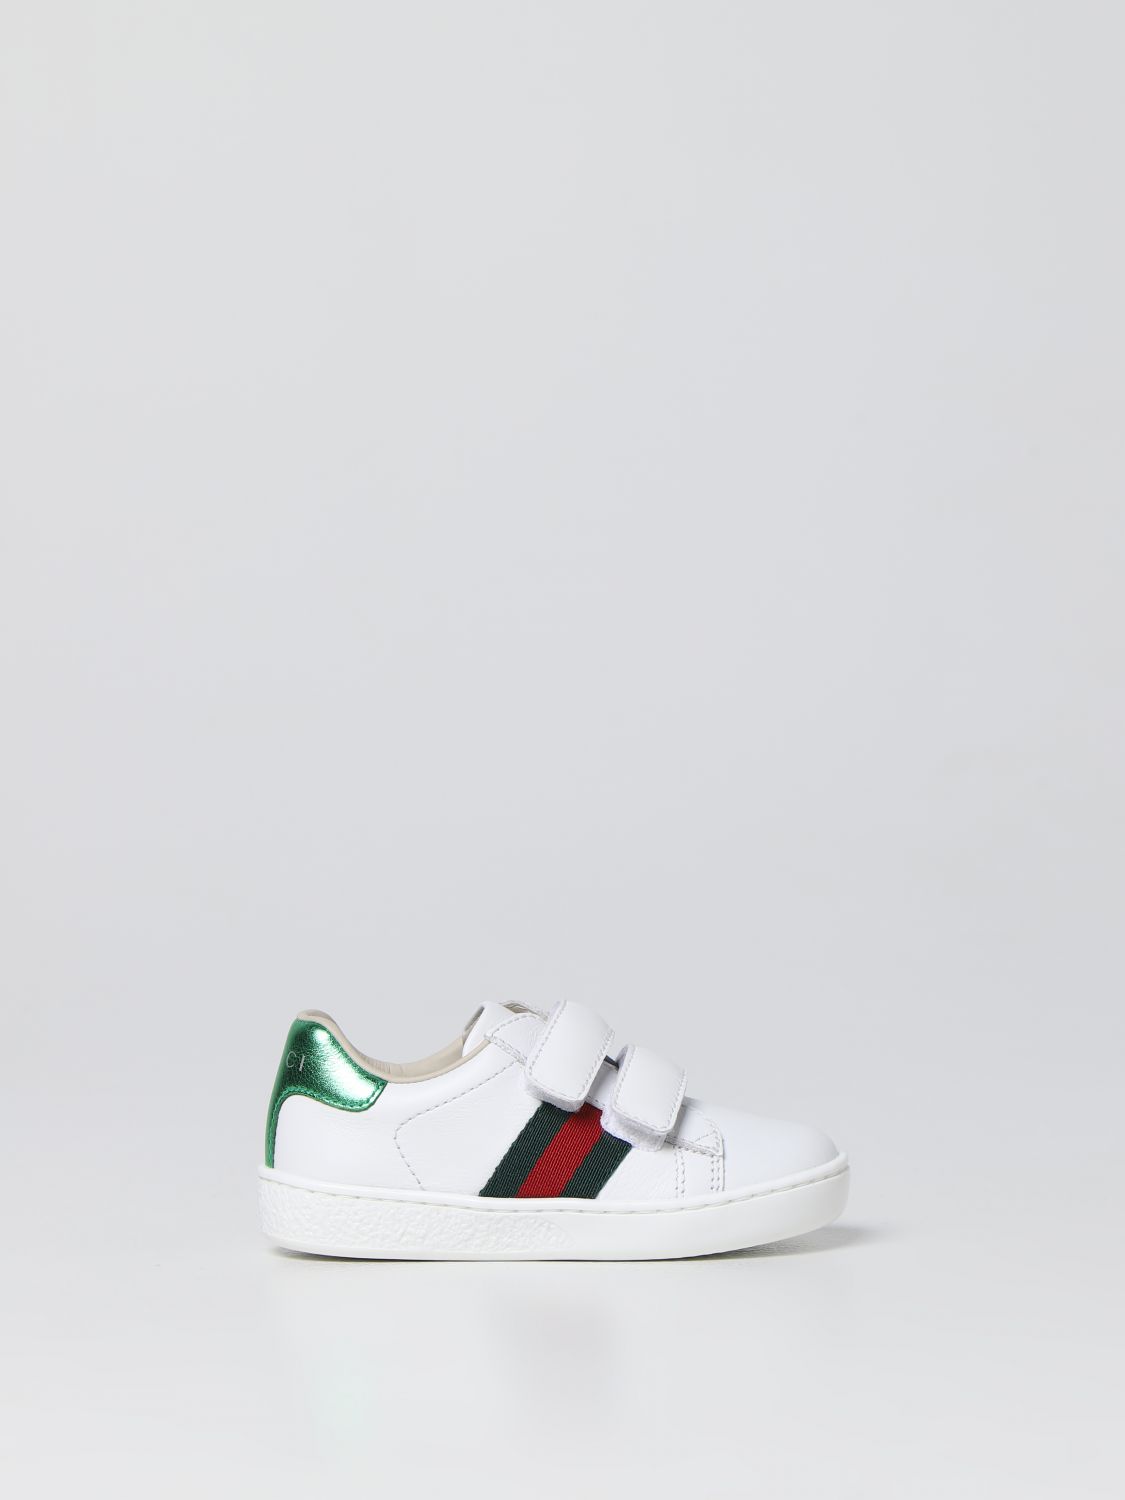 Duftende nøgen I forhold GUCCI: smooth leather sneakers - White | Gucci shoes 455447CPWP0 online on  GIGLIO.COM